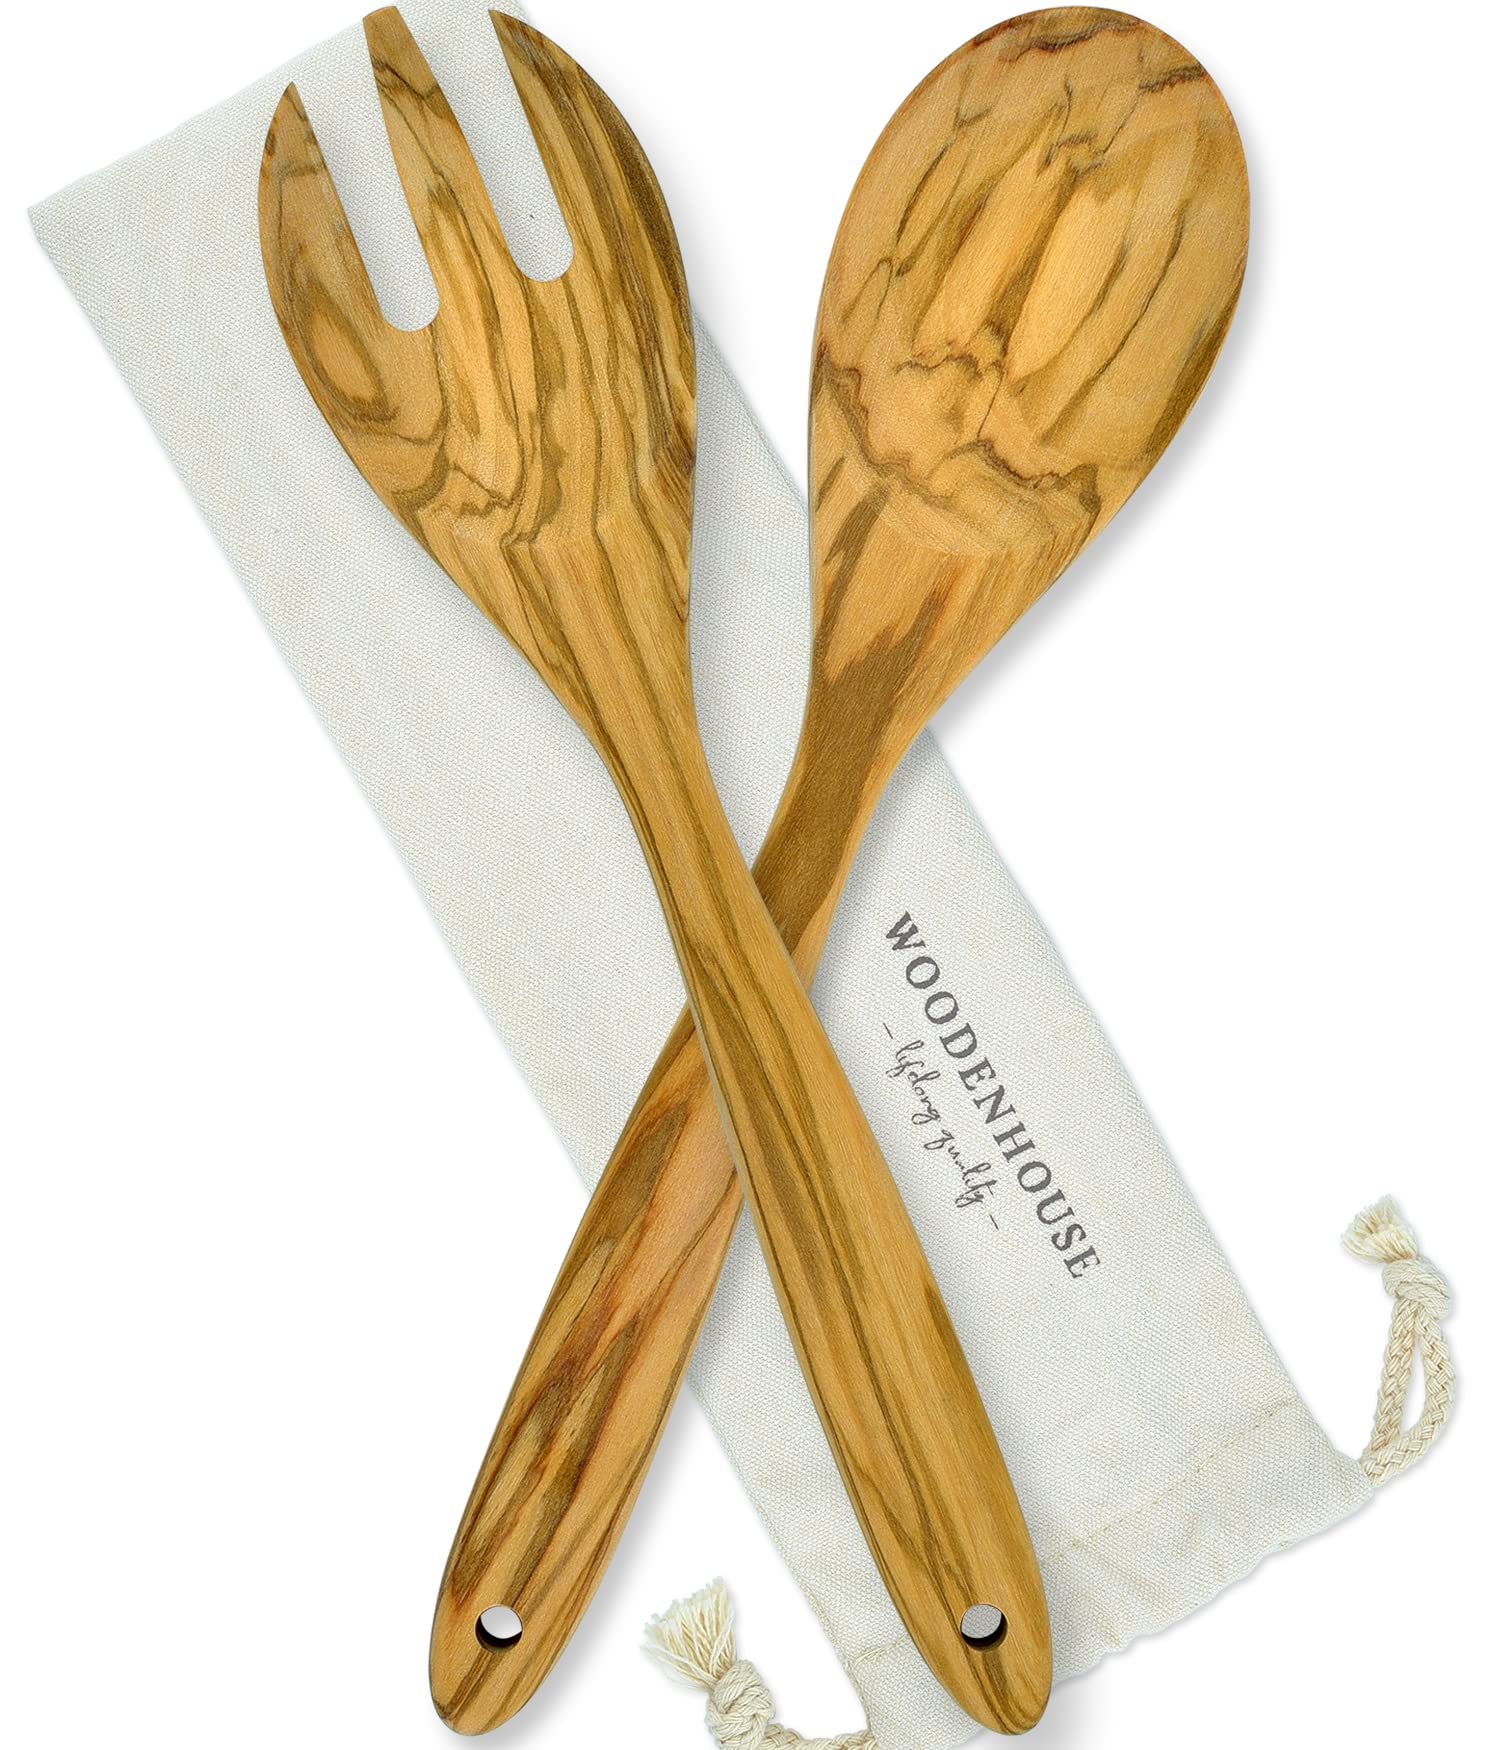 Wooden Cooking Utensils with Holder & Spoon Rest – Woodenhouse Lifelong  Quality